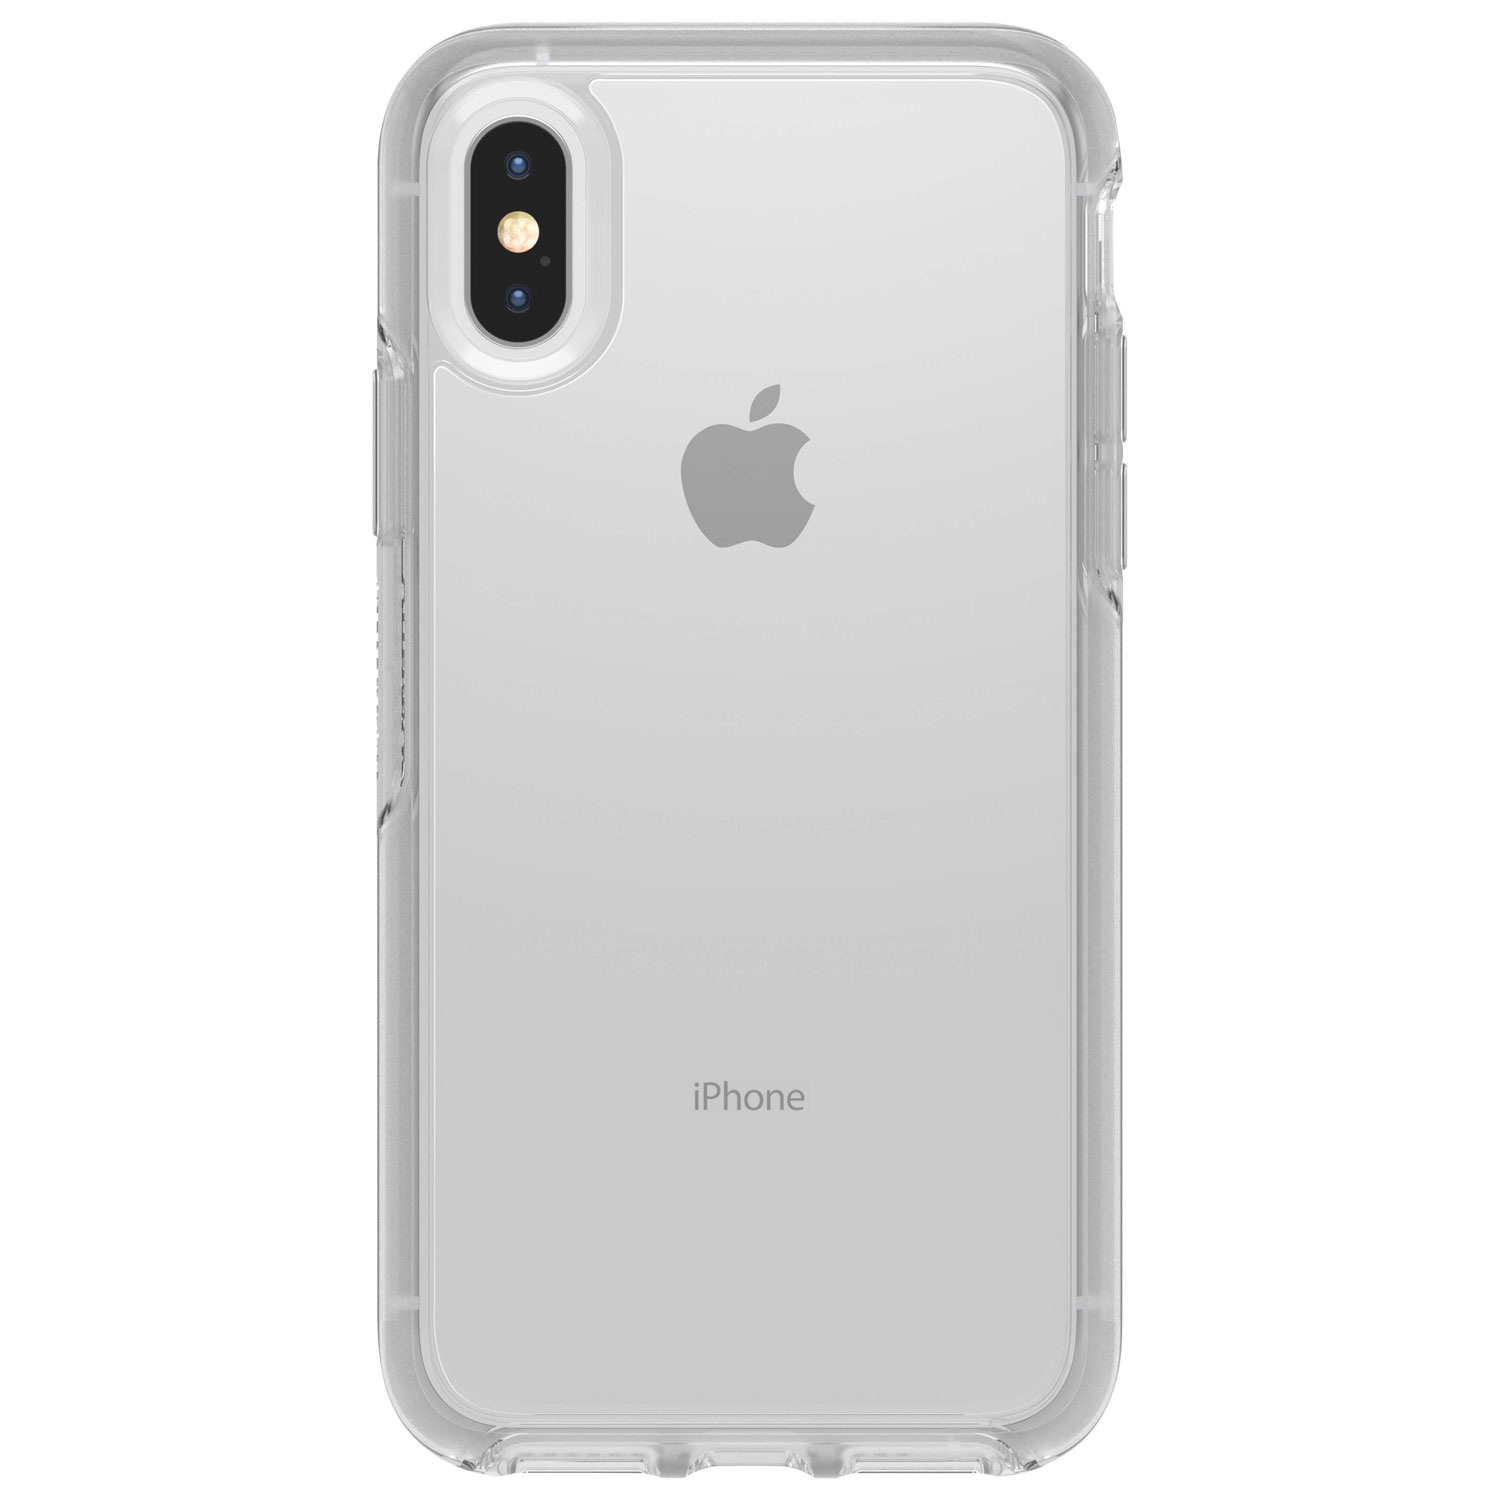 OtterBox Symmetry Fitted Hard Shell Case for iPhone X/XS - Clear